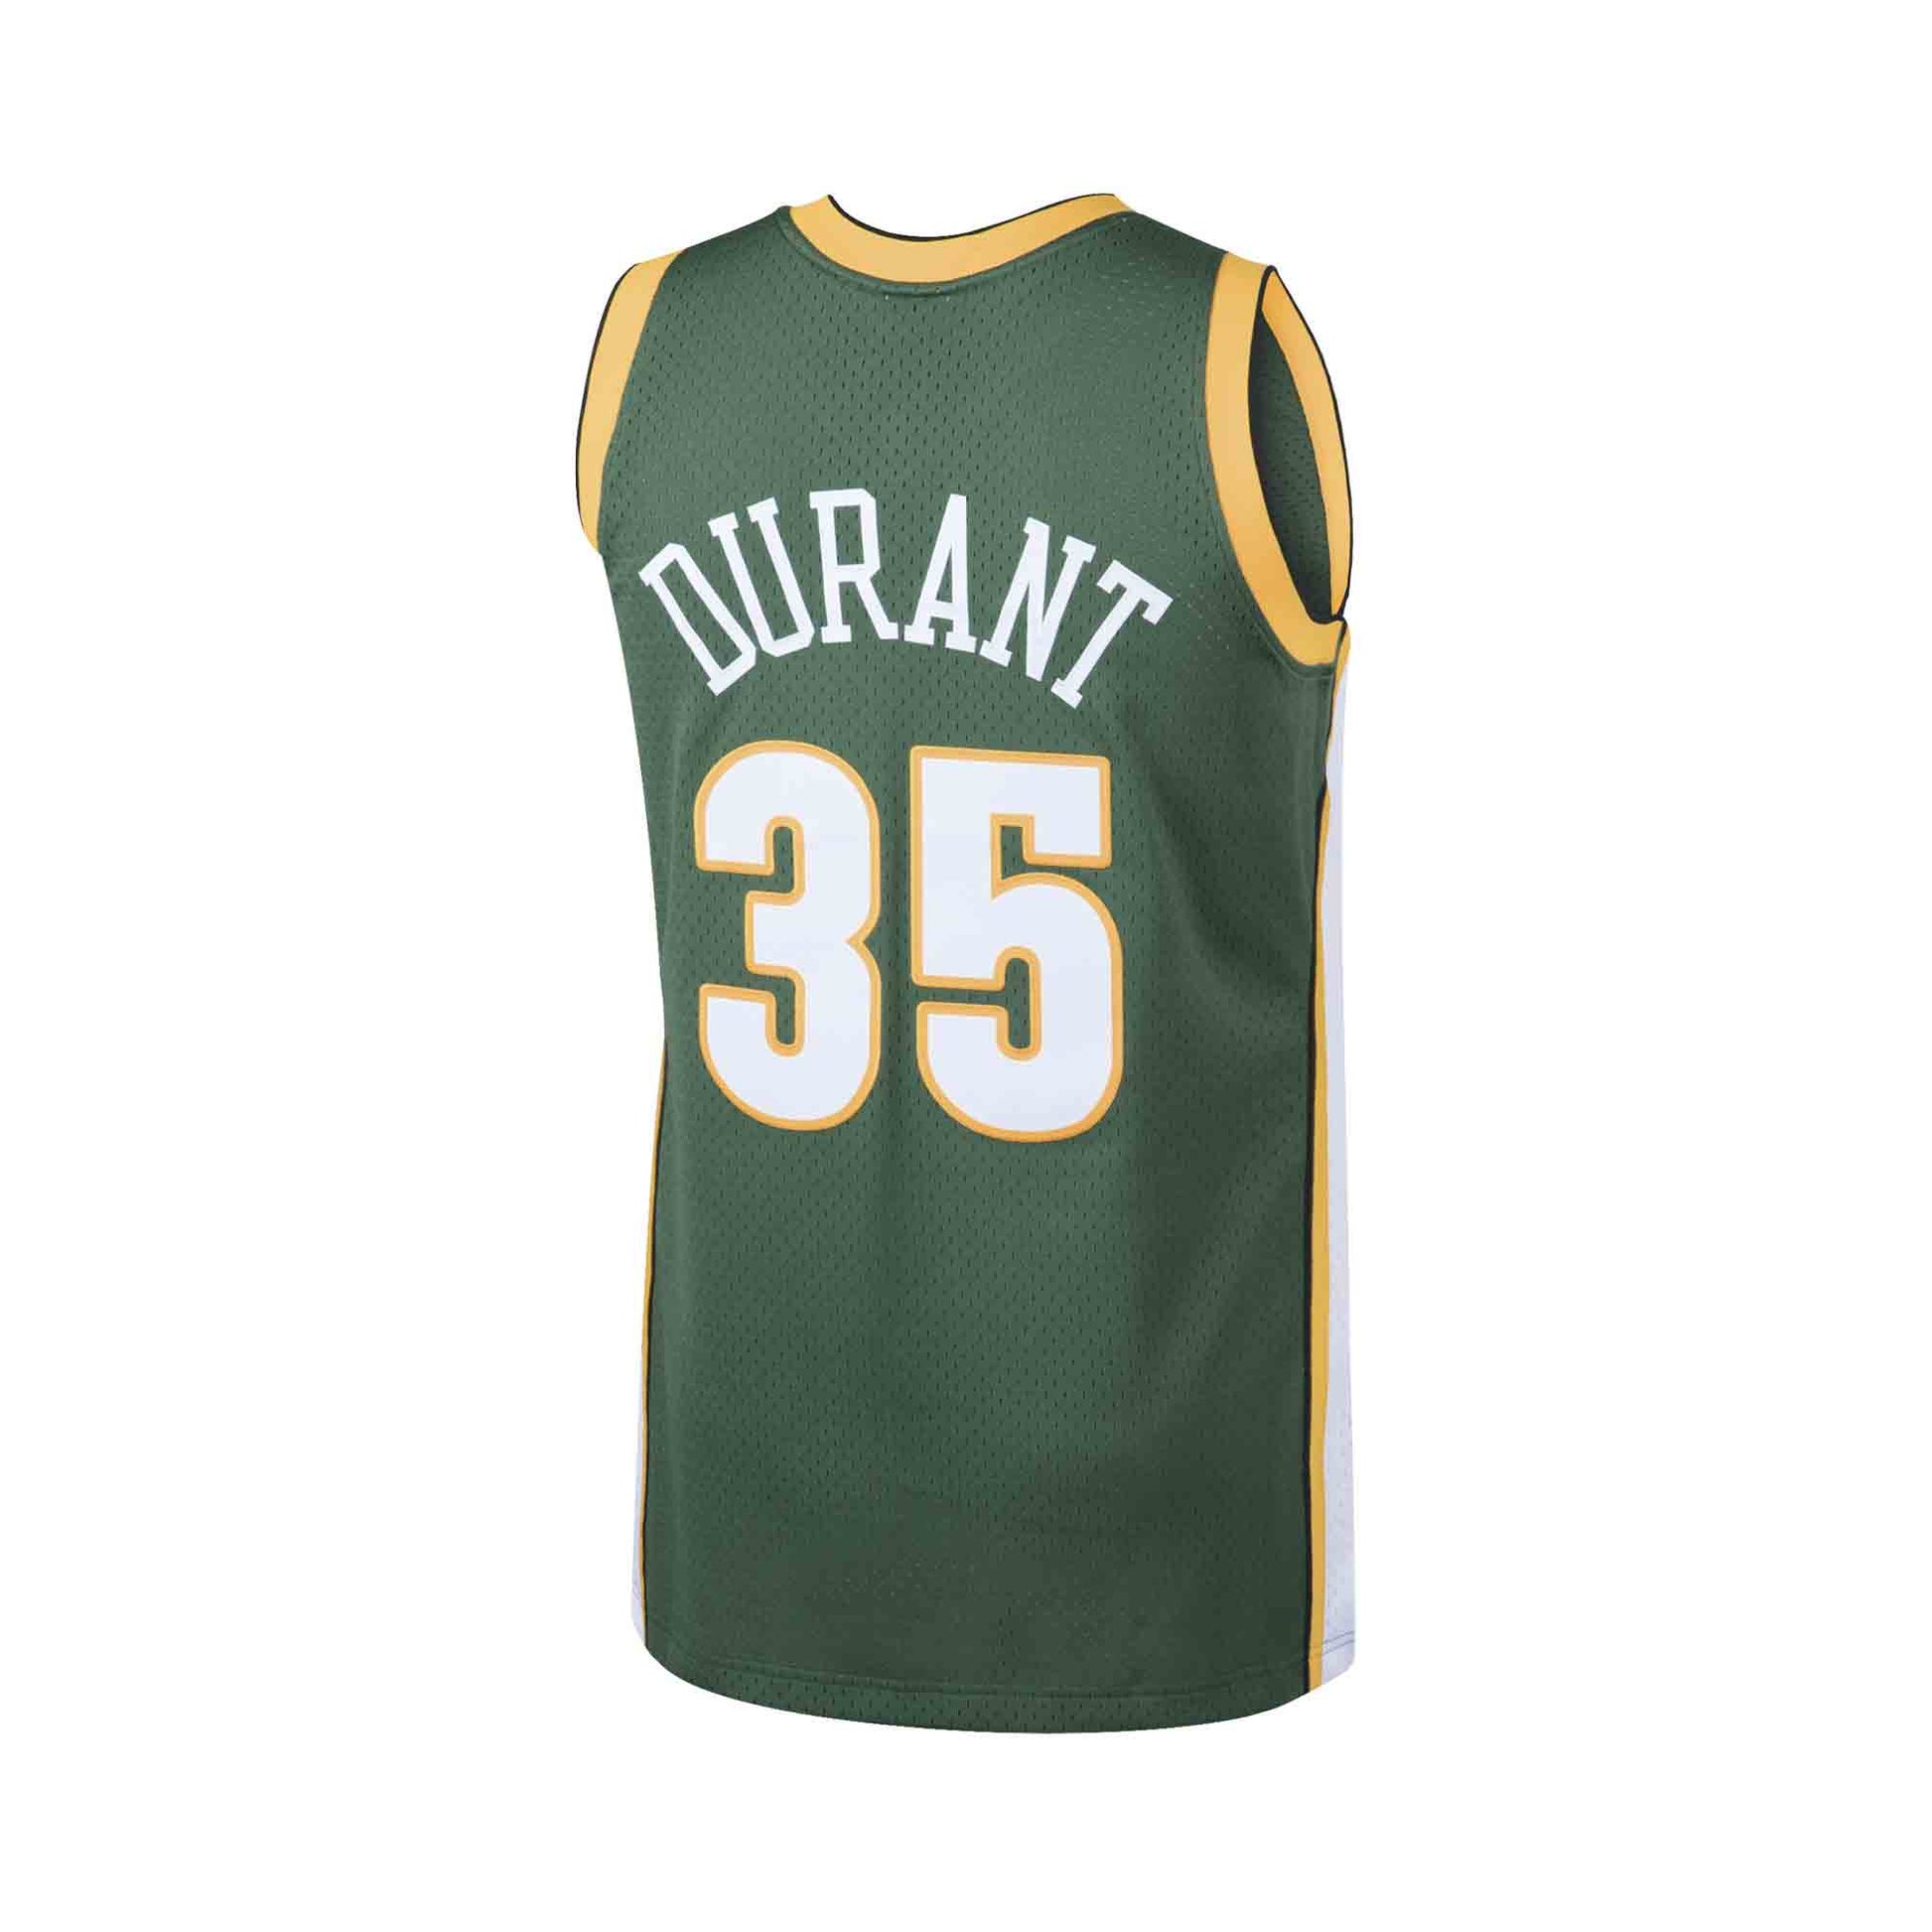 NBA Kevin Durant #35 Golden State Warriors Swingman Jersey Size Large